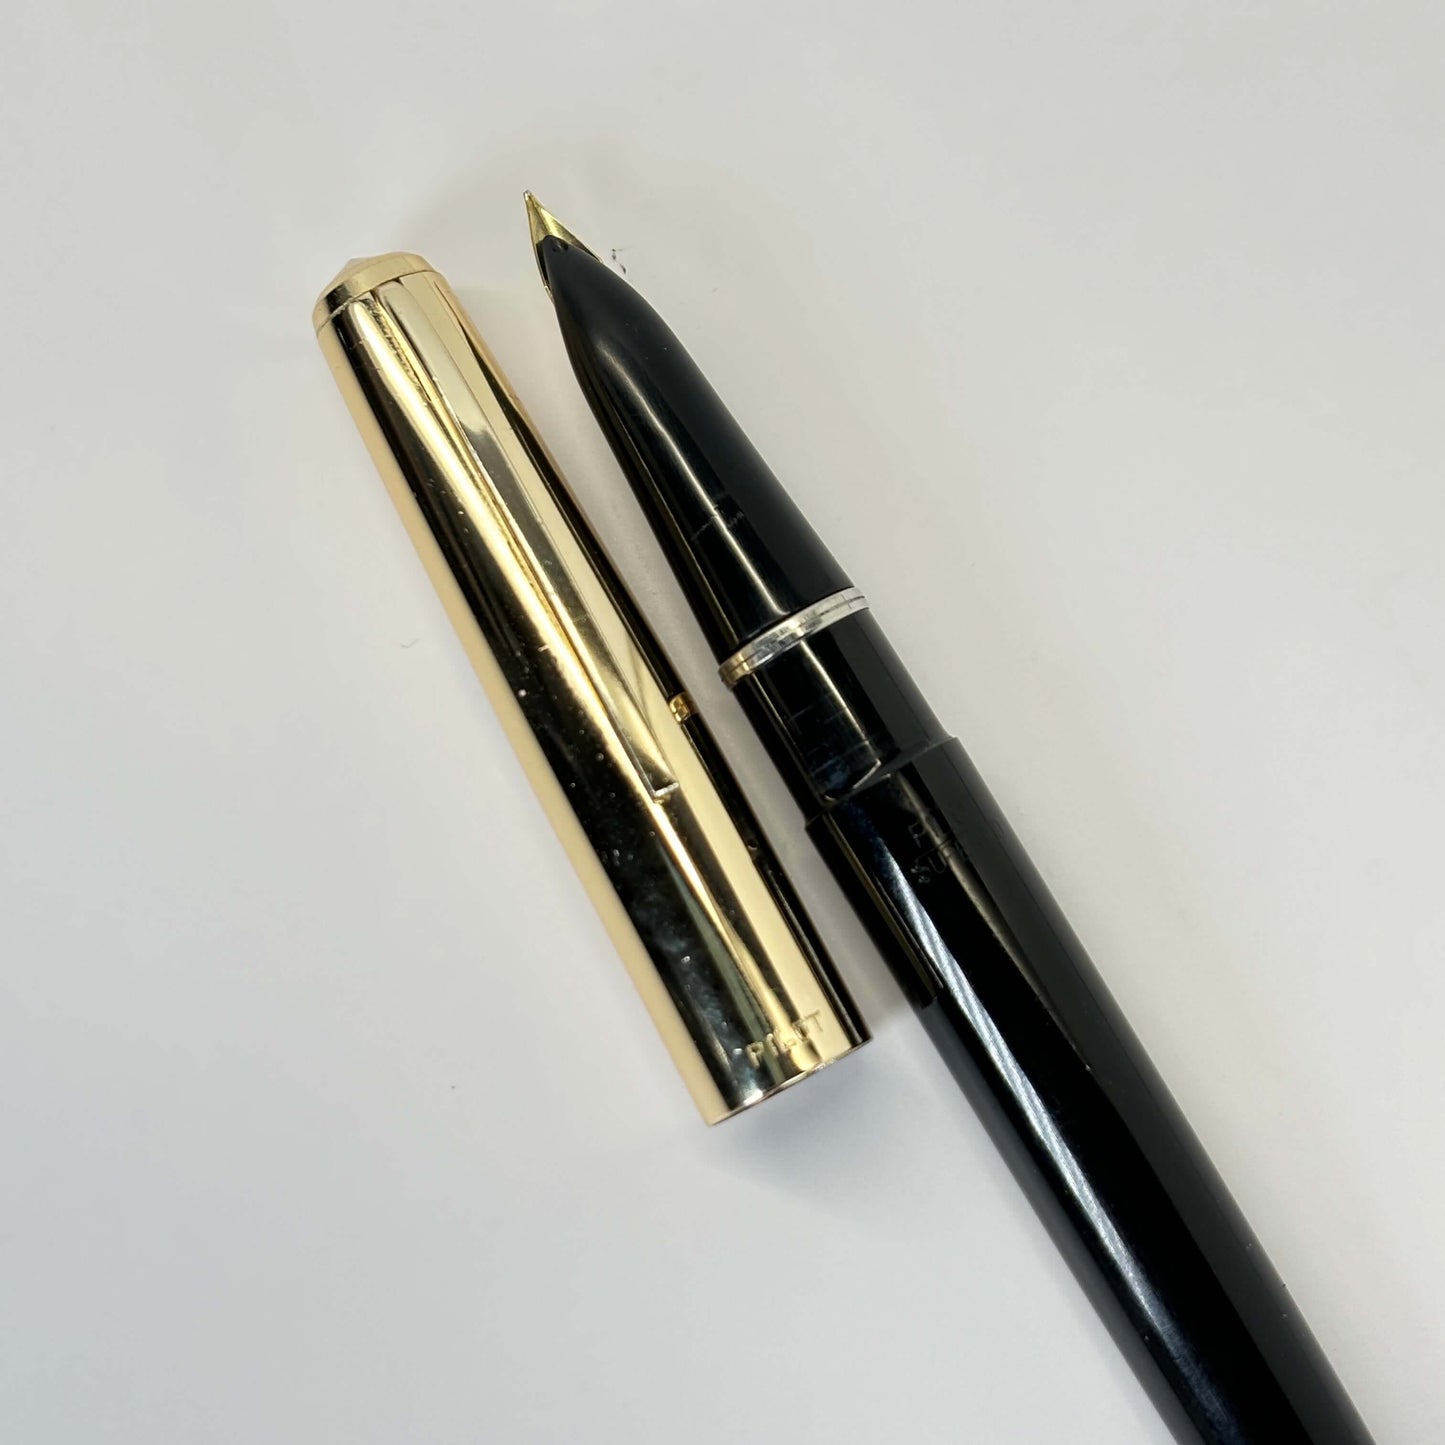 Pilot, Super 100, Flip Filler, Black with Gold Plated Cap Name/Type: Pilot Super 100 Manufacture Year: Early 1960s Length: 5 1/8 Filling System: Flip filler; restored with new sac Color/Pattern: Black with gold plated cap Nib Type/Condition and remarks: E